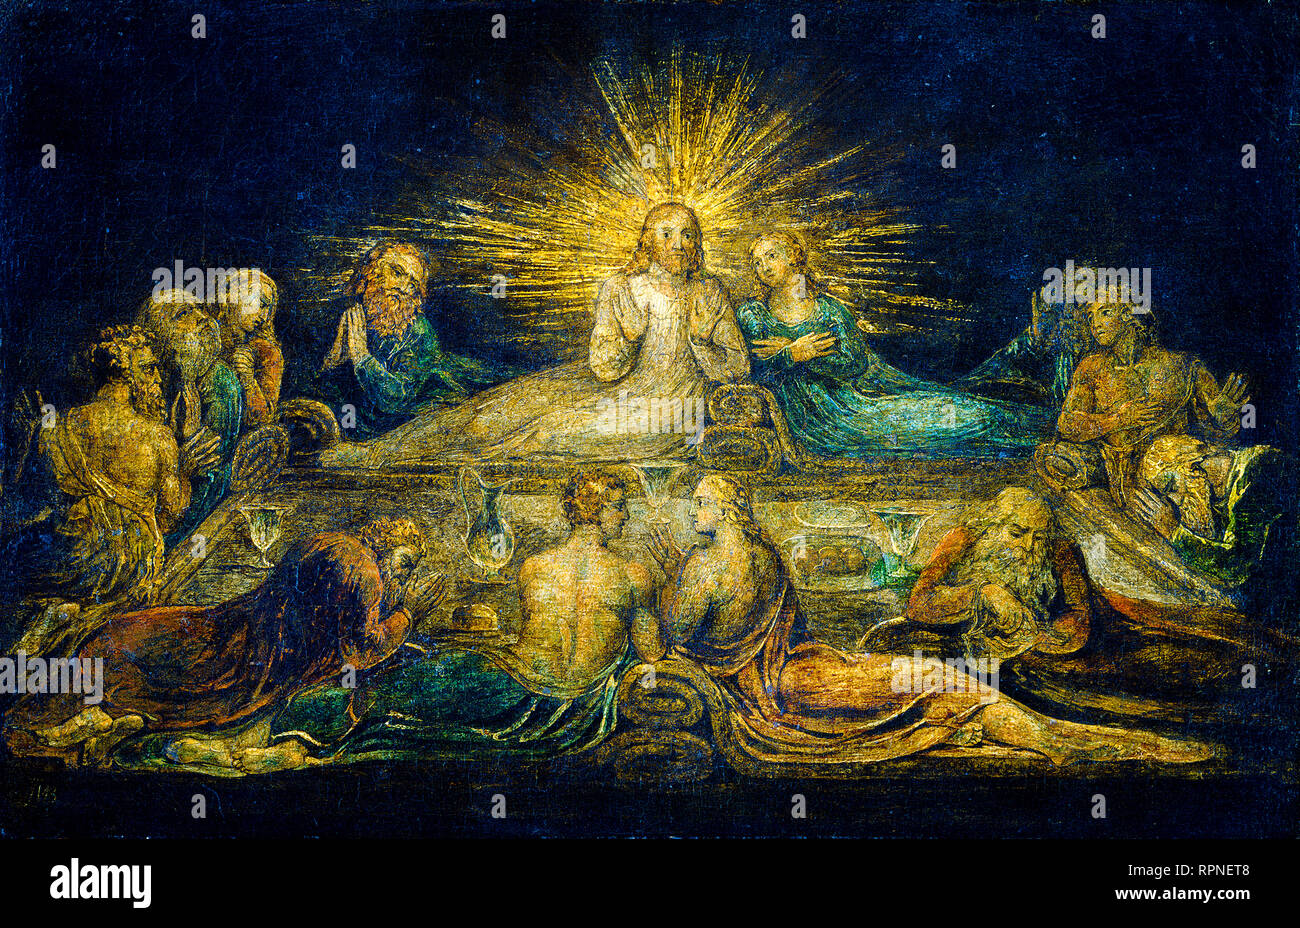 William Blake, The Last Supper, 1799, tempera on canvas painting Stock Photo